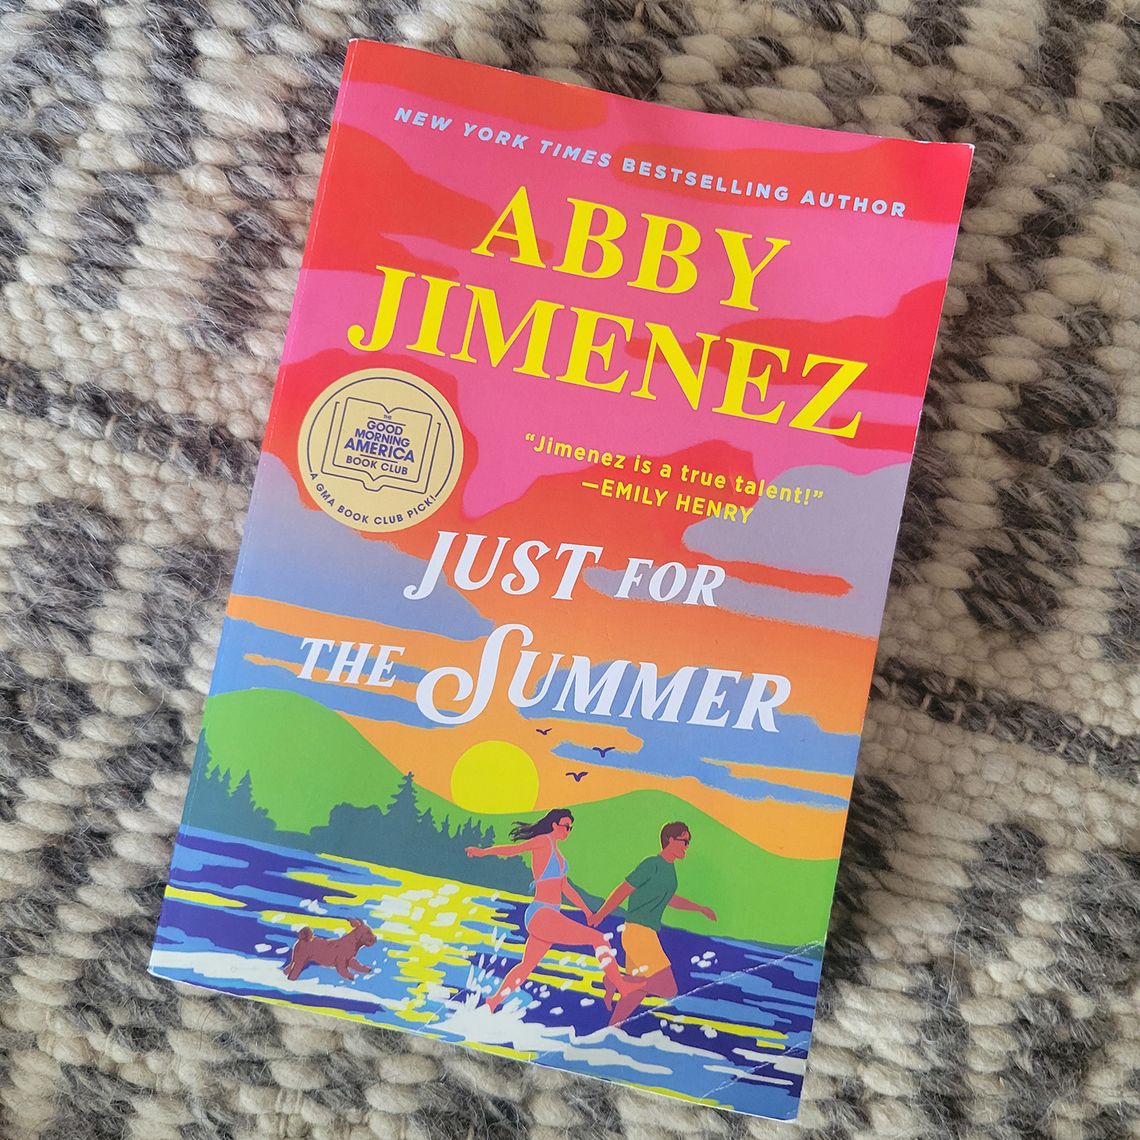 “Just for the Summer” by Abby Jimenez